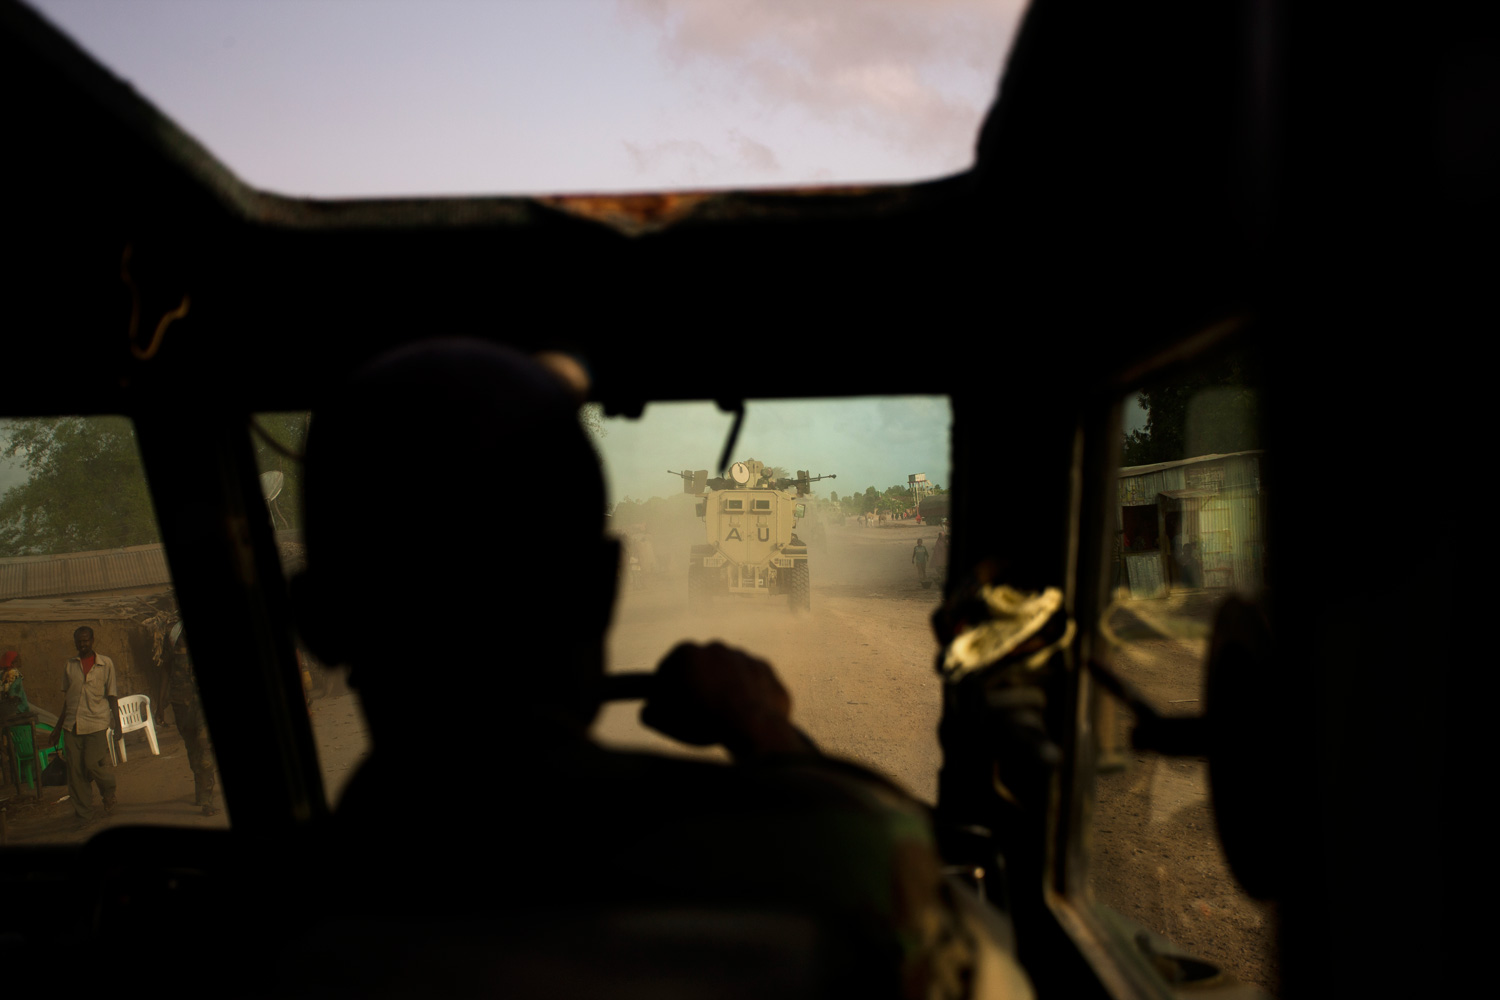 A view from inside an African Union armored vehicle along the Mogadishu-Afgoye road in Afogye, where attacks from Al-Shabaab are frequent.